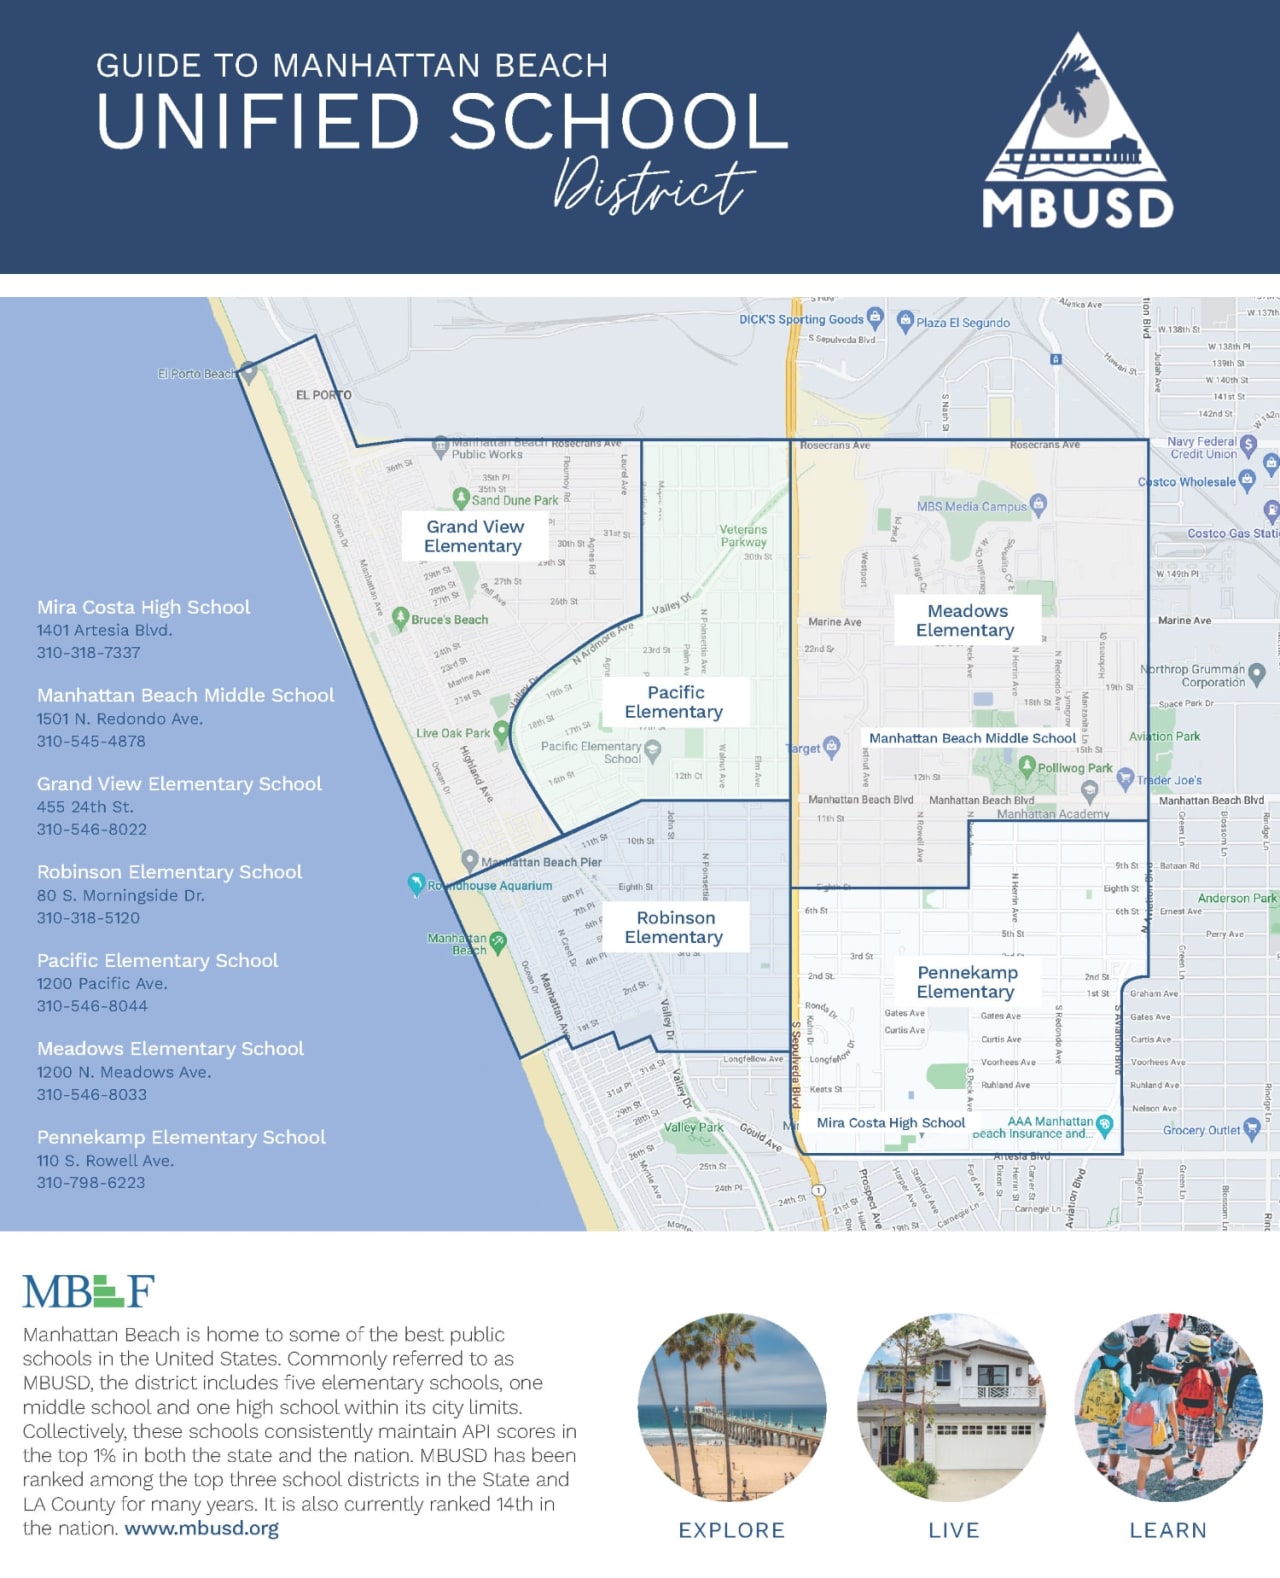 A Guide to Manhattan Beach Residential Areas & School Zones